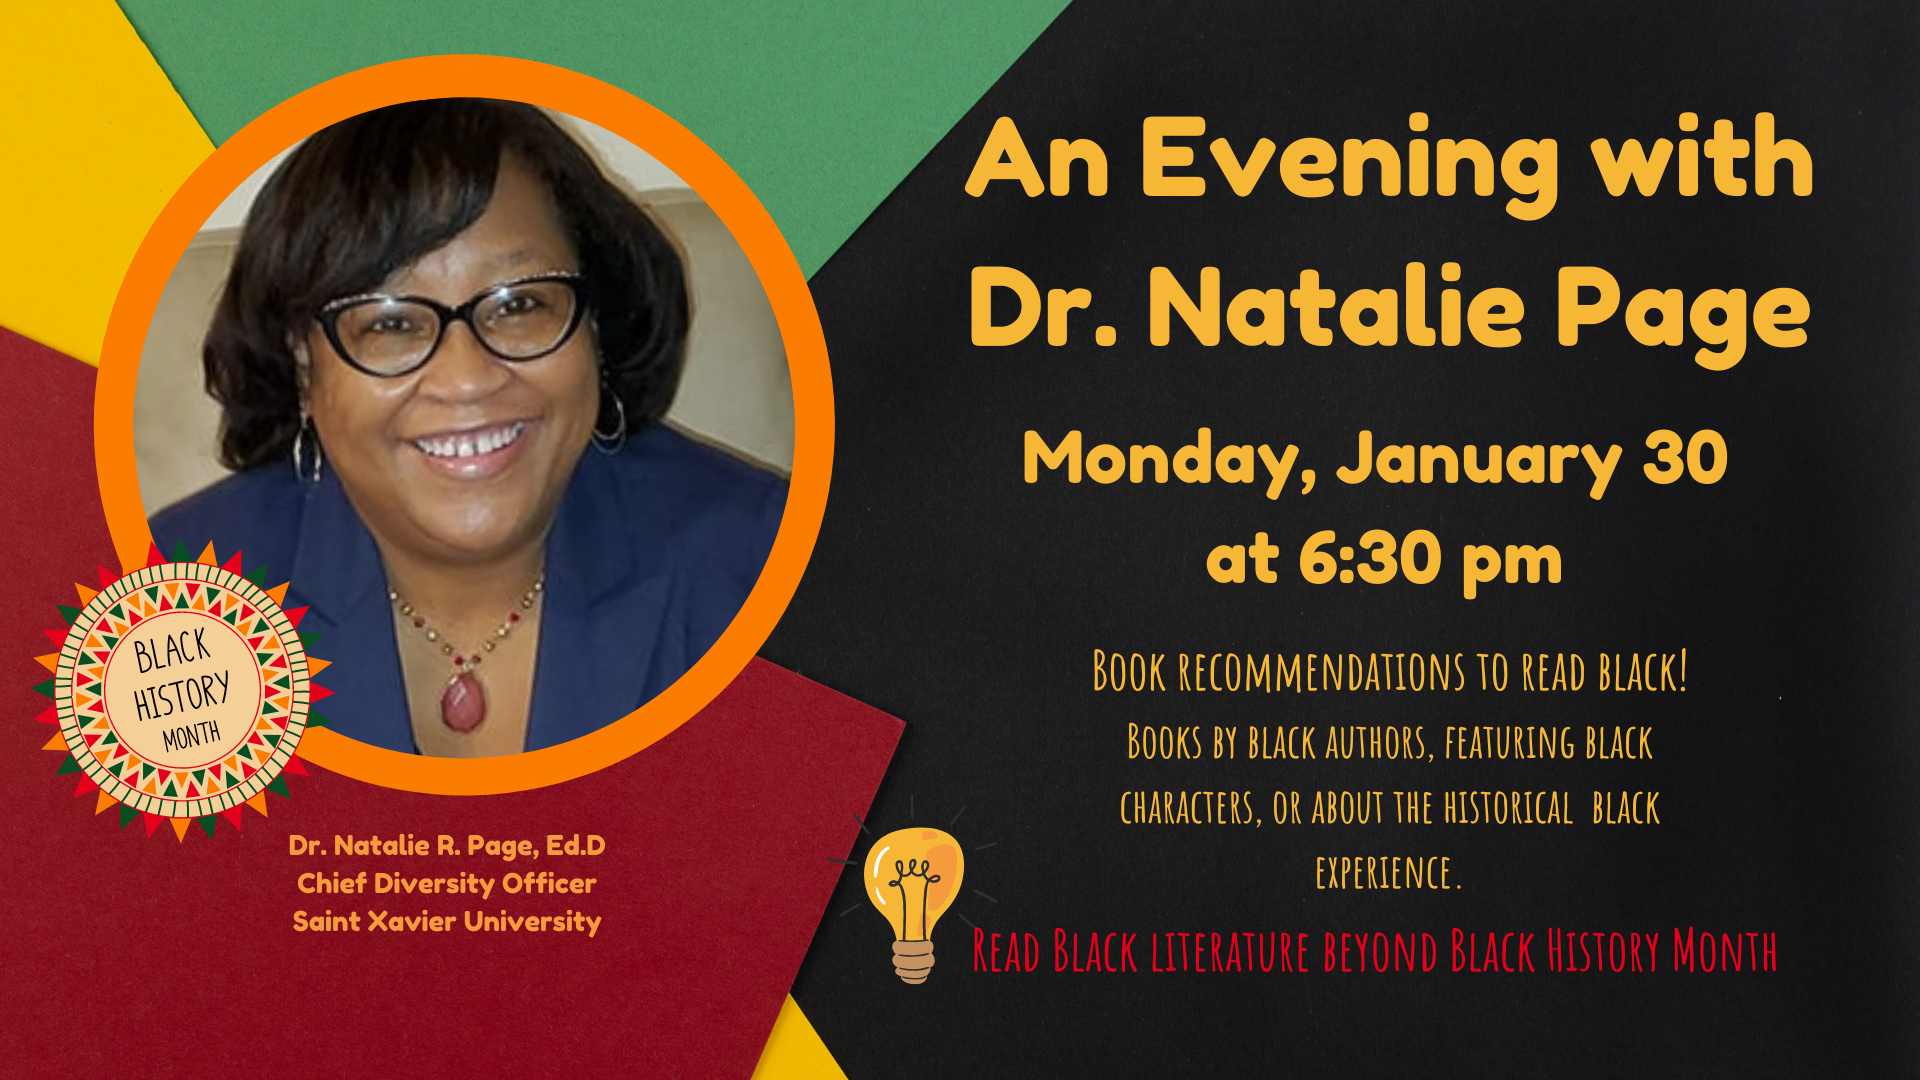 An Evening with Dr. Natalie Page